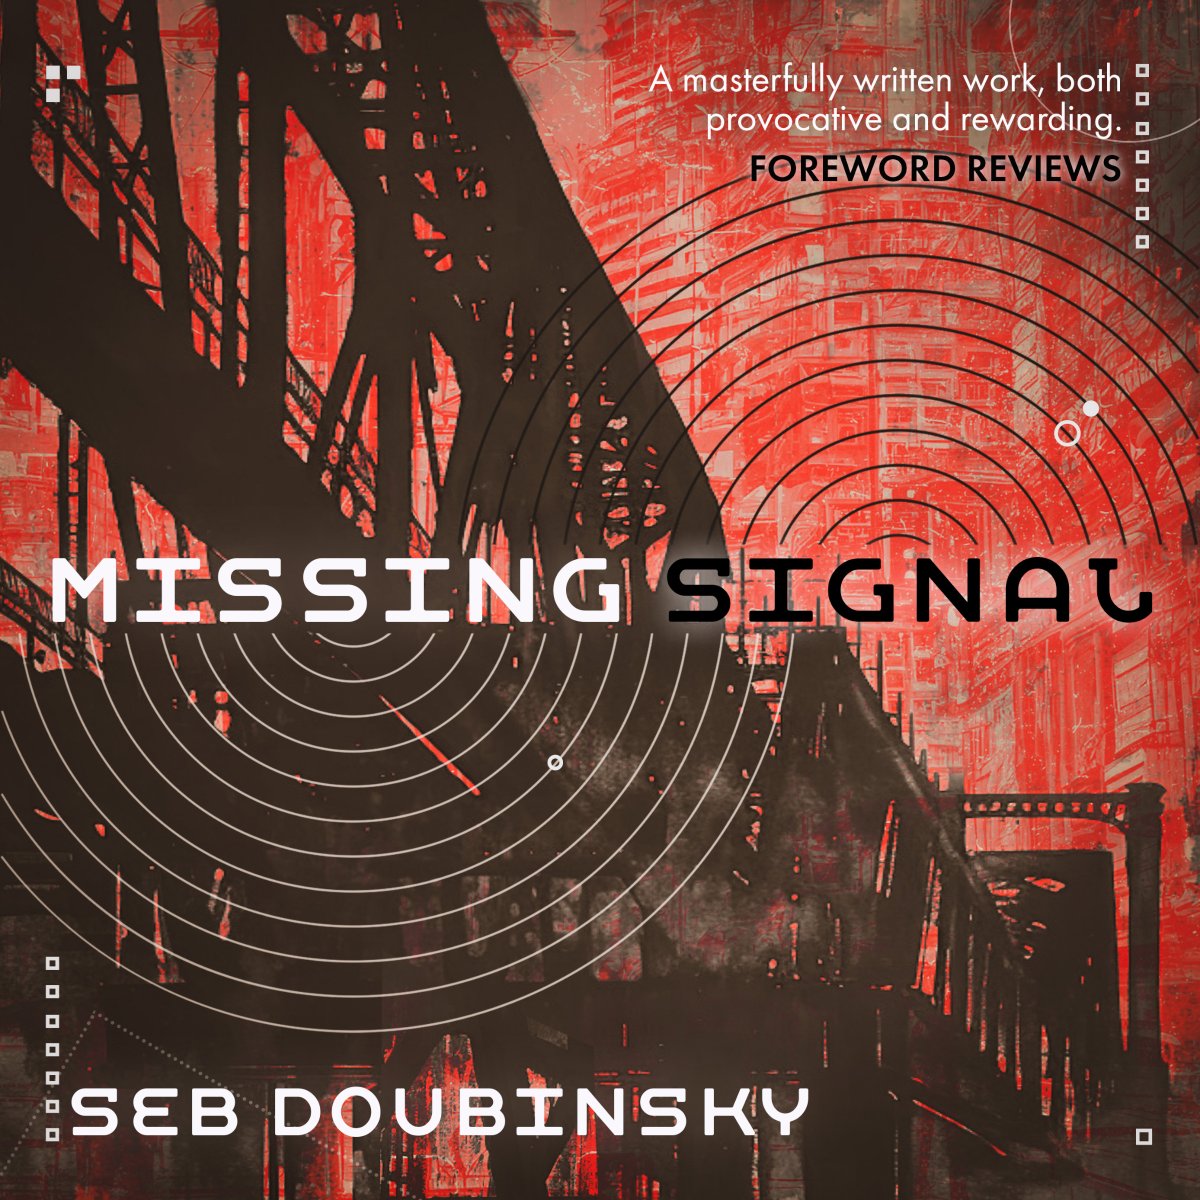 Excited that this gem is also coming to audiobook any day now! (and also in development for screen.) And available now in paperback and ebook. Disinformation rules in this scifi thriller by @SebDoubinsky! smpl.is/8vwl8 #ufositings #propaganda #mustread #quickread